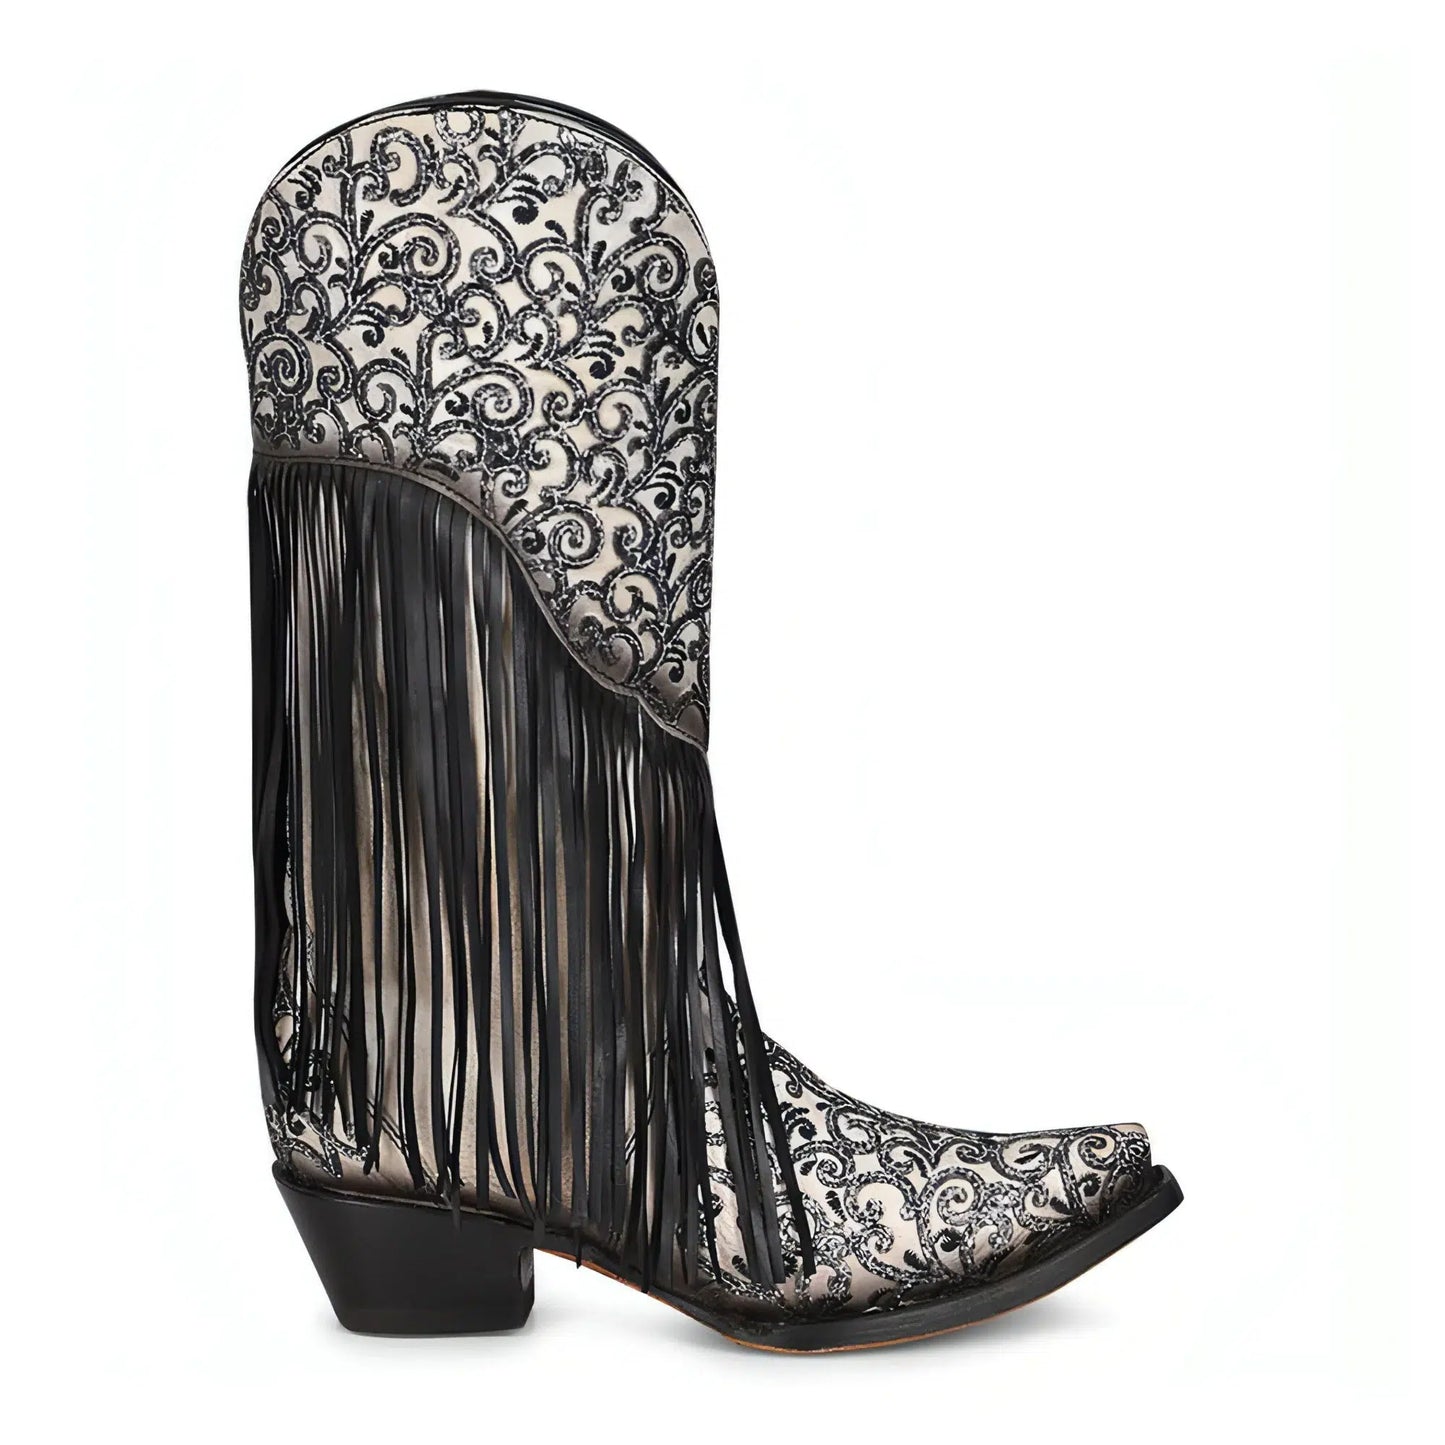 C3877 - M Corral black and white western cowgirl leather fringe boots for women